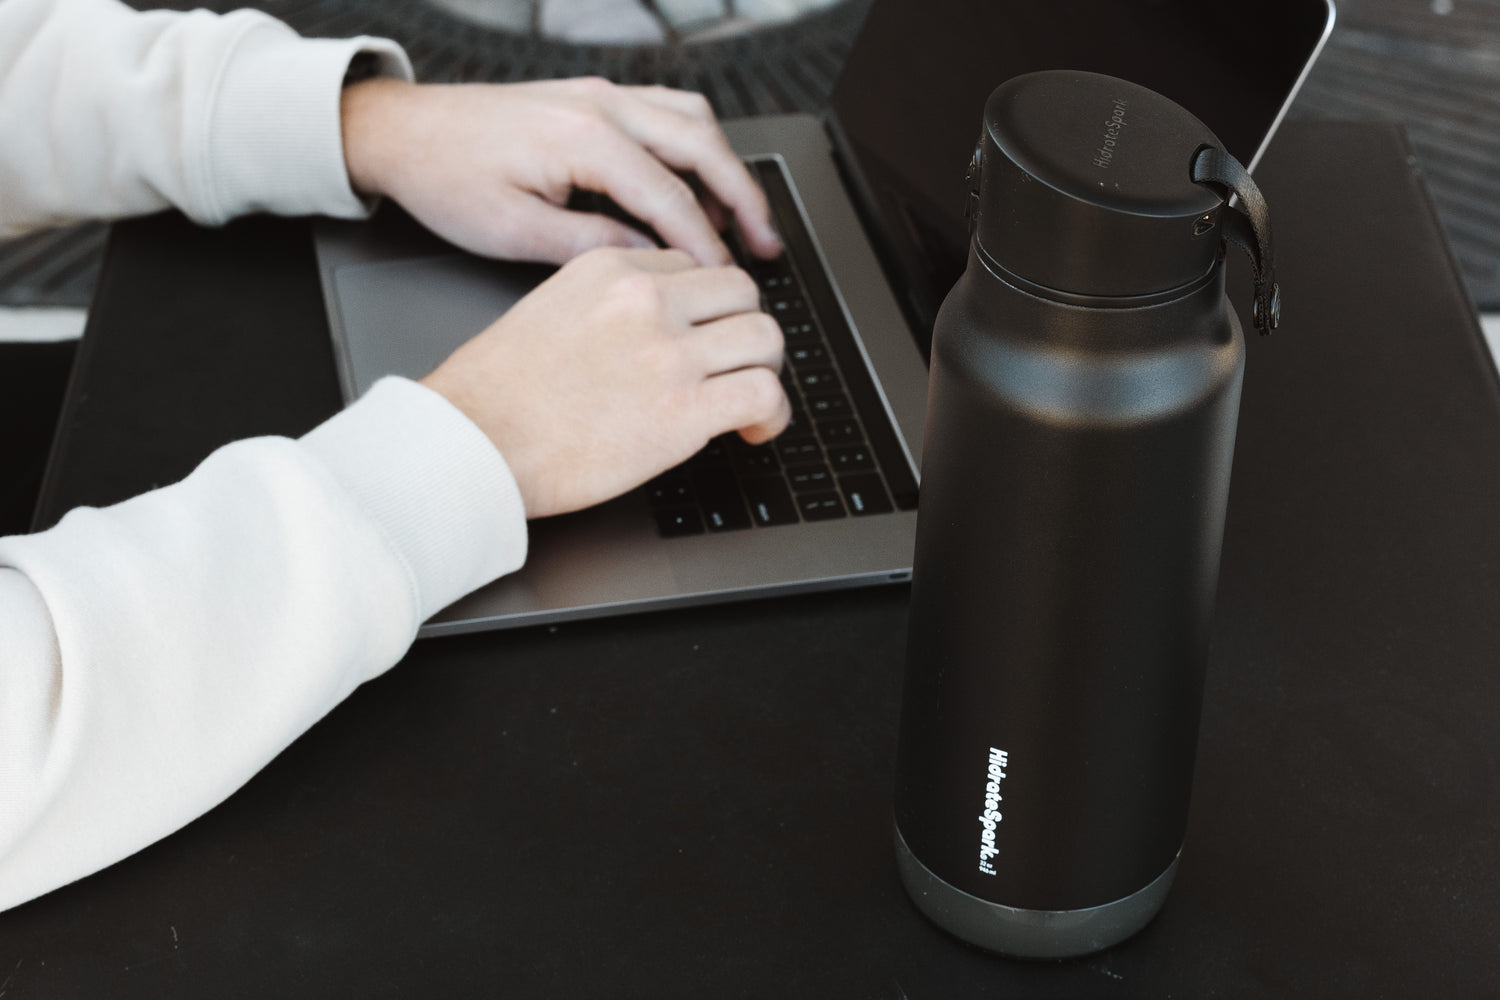 A HidrateSpark smart water bottle glowing to remind you to drink.